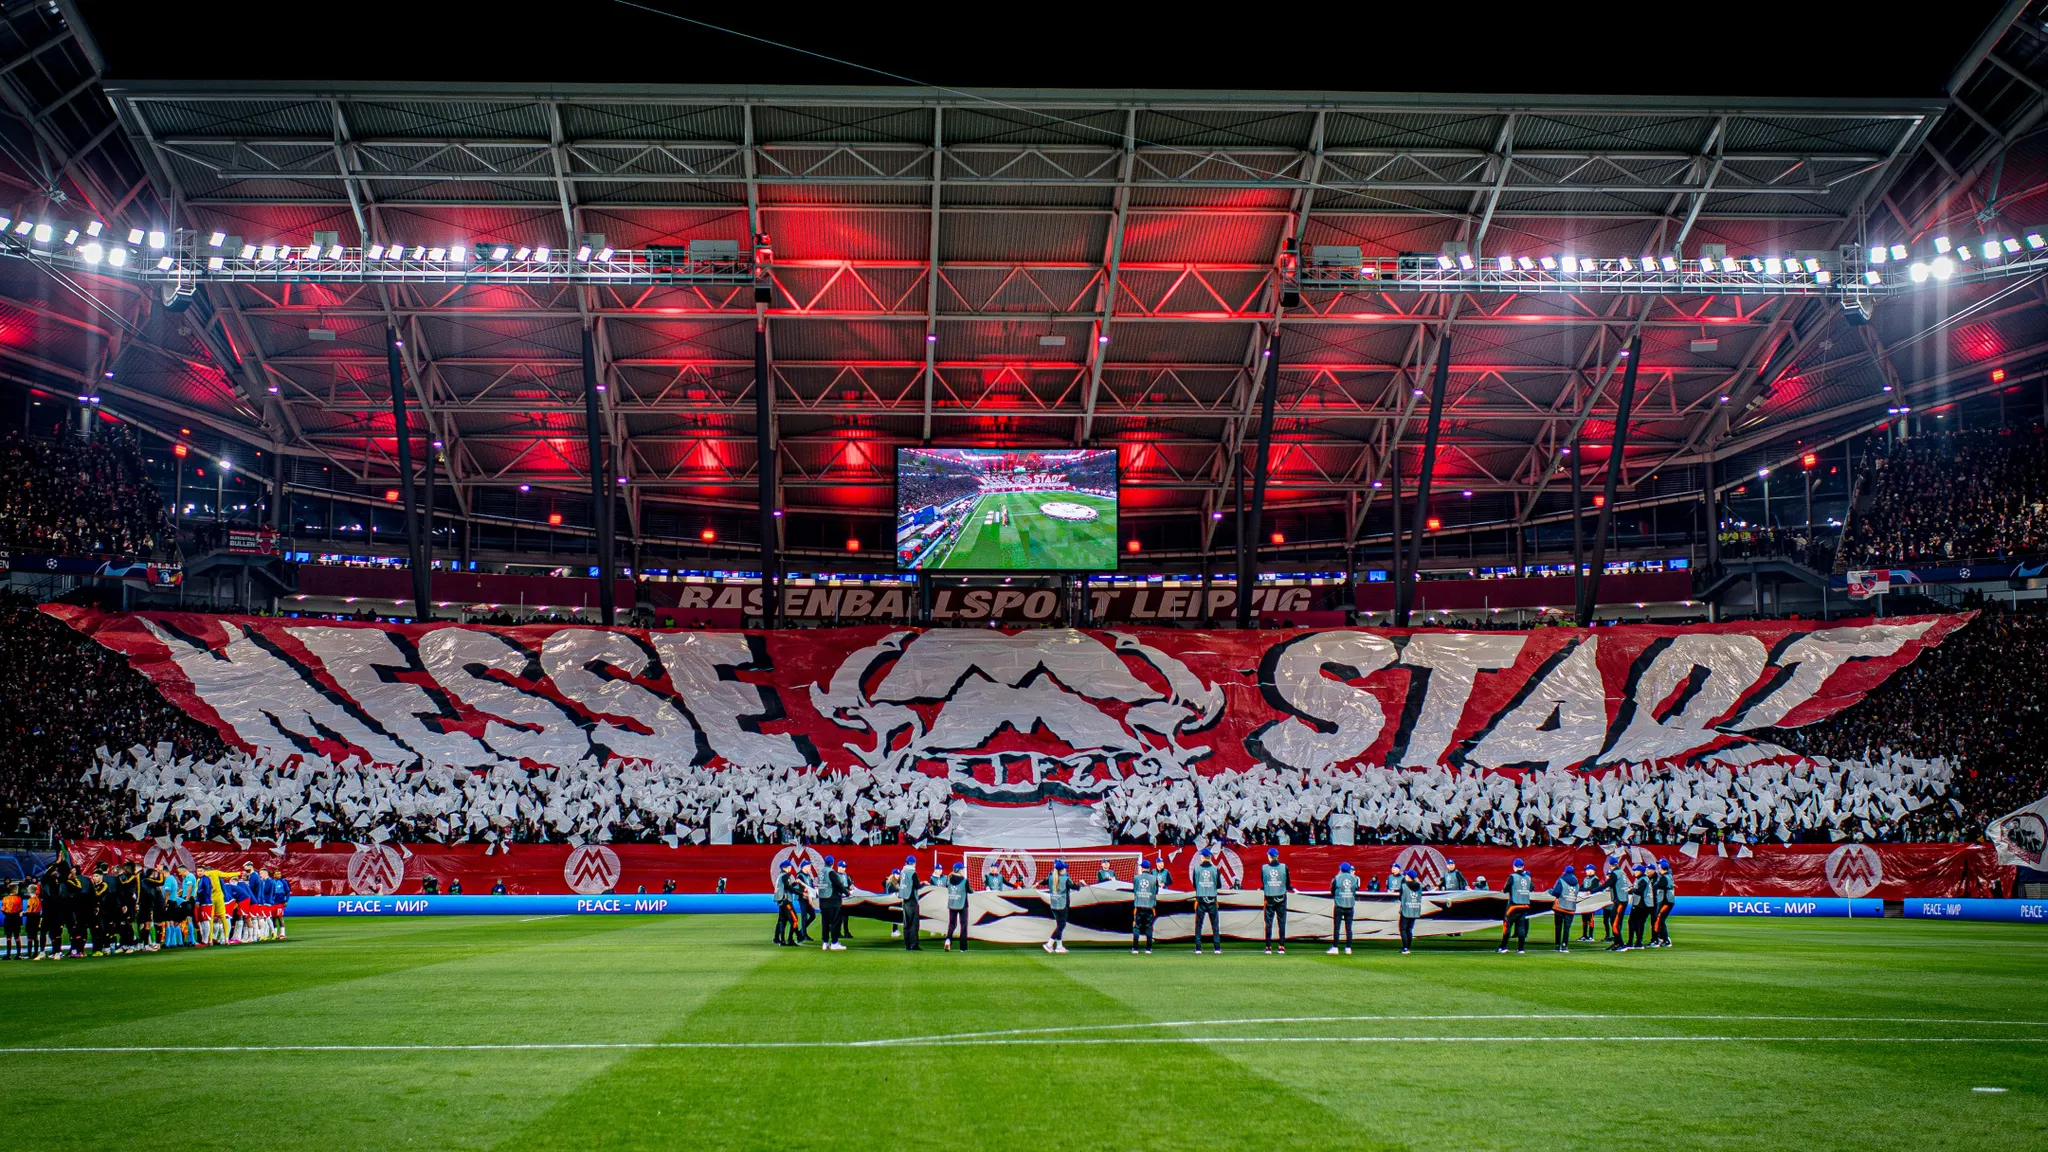 RBL fans with a choreography before the Champions League round of 16 against Real Madrid.